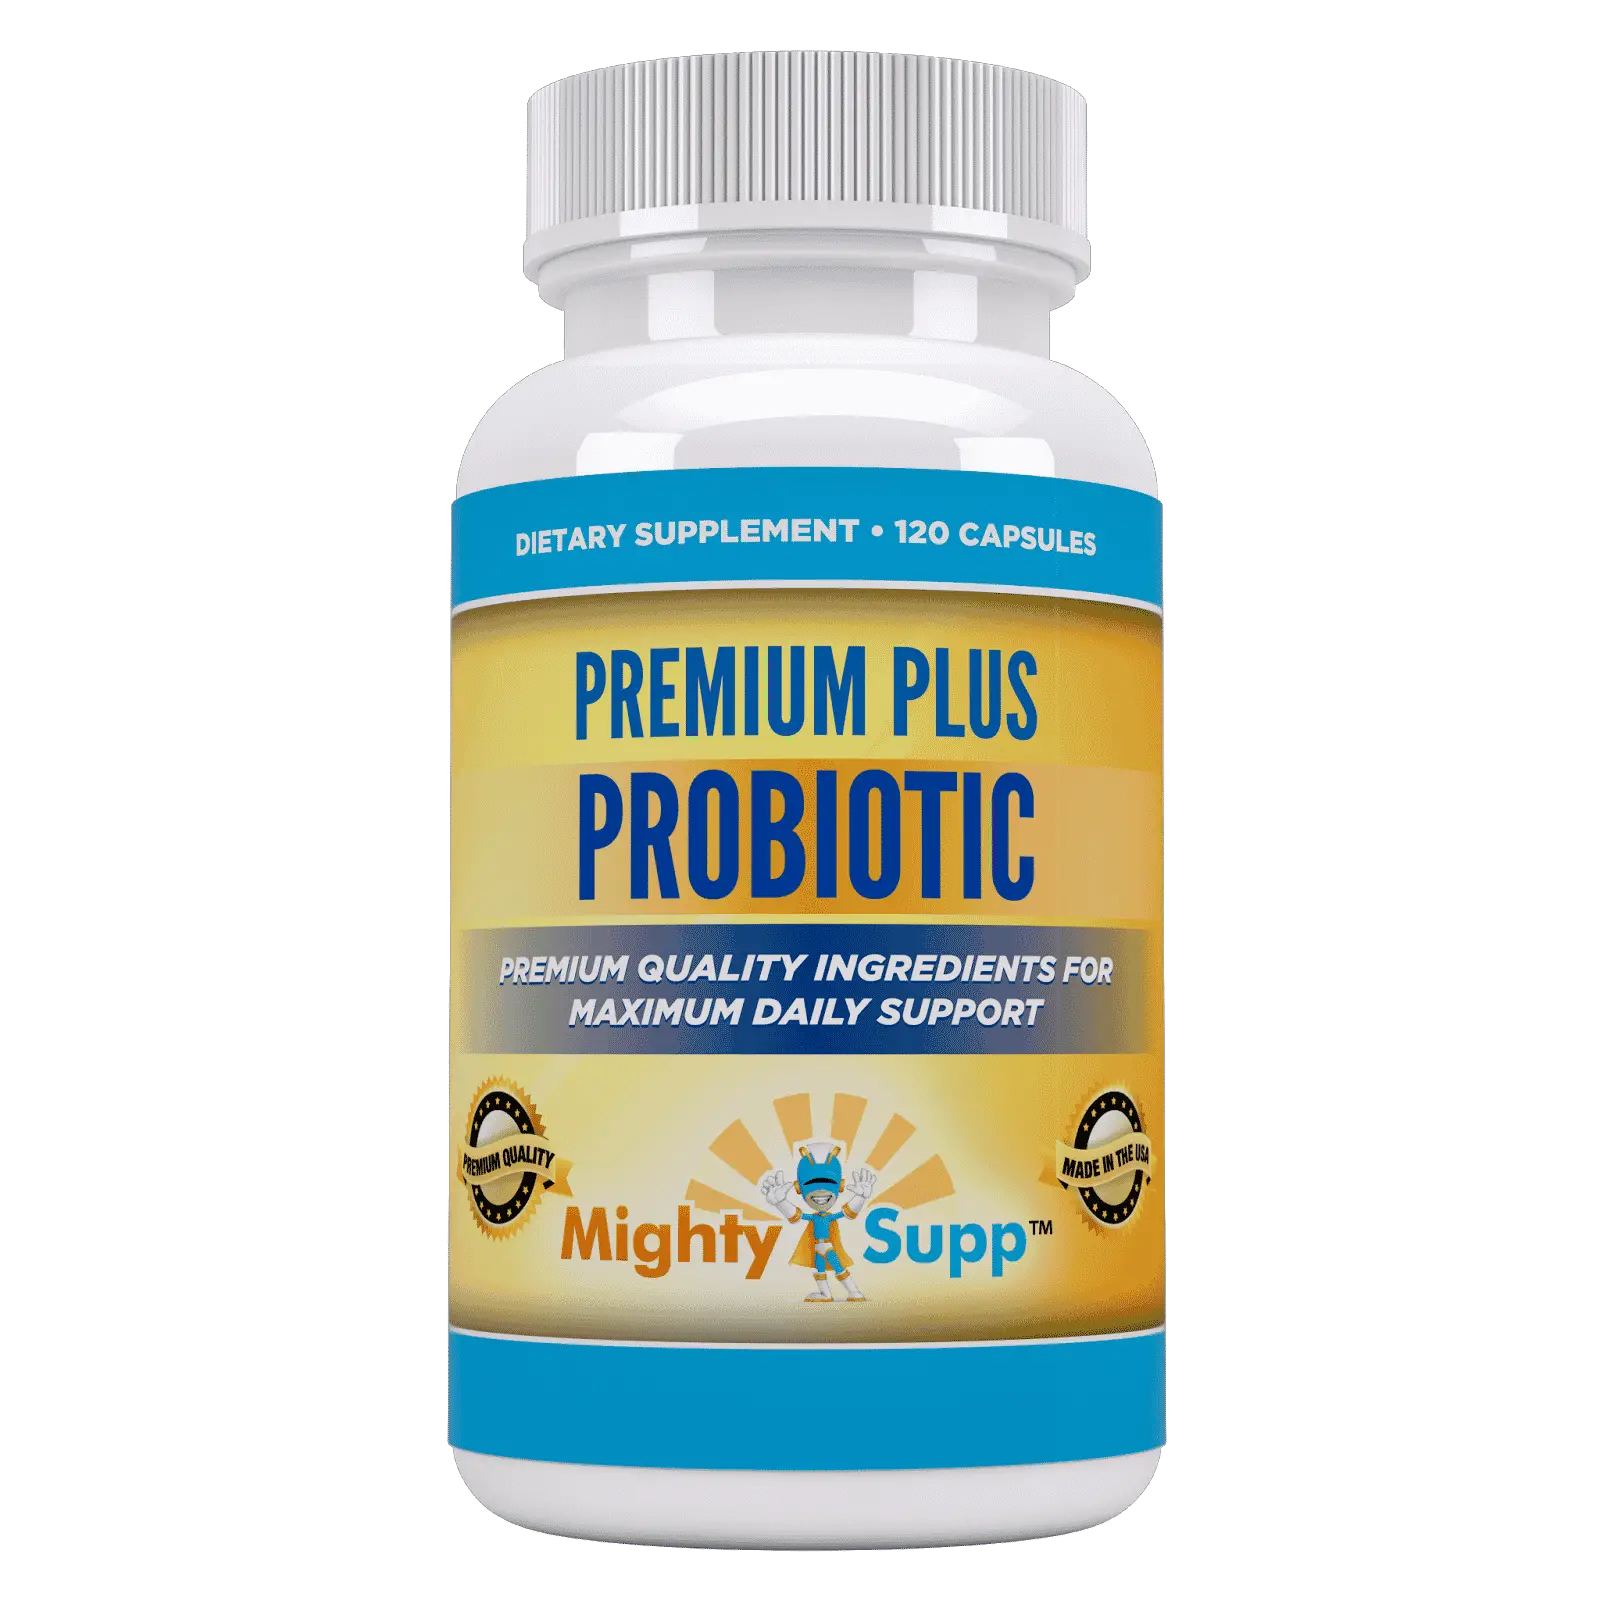 {#Giveaway} Premium Plus Probiotic by Mighty Supp. ENDS 10/31. US. via ...